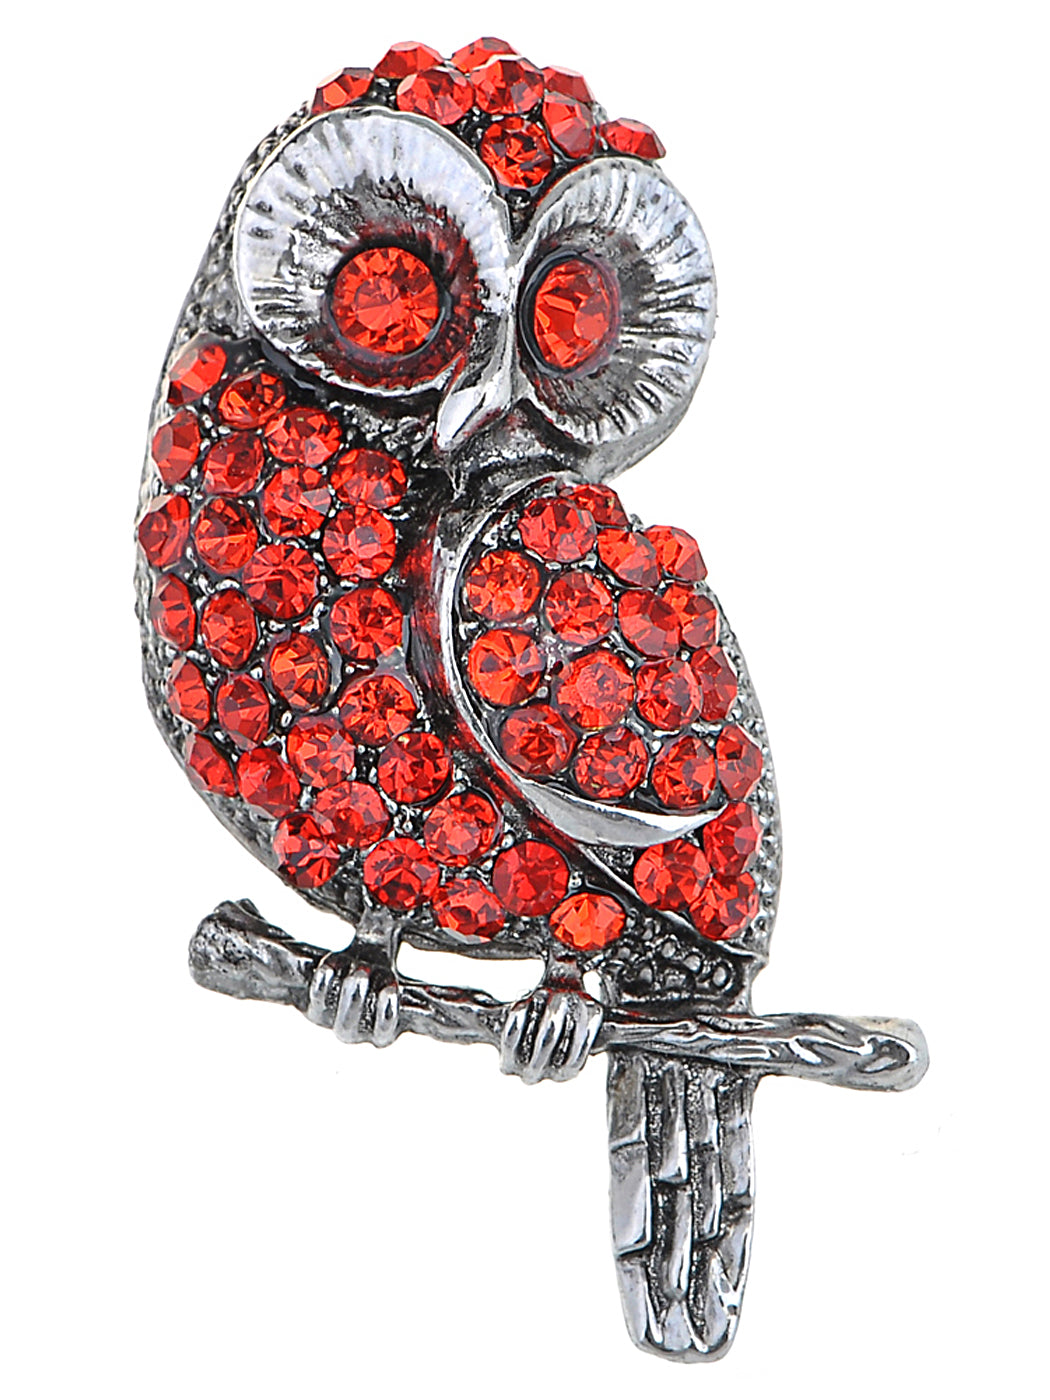 Antique Red Colored Big Eyed Owl Bird Brooch Pin